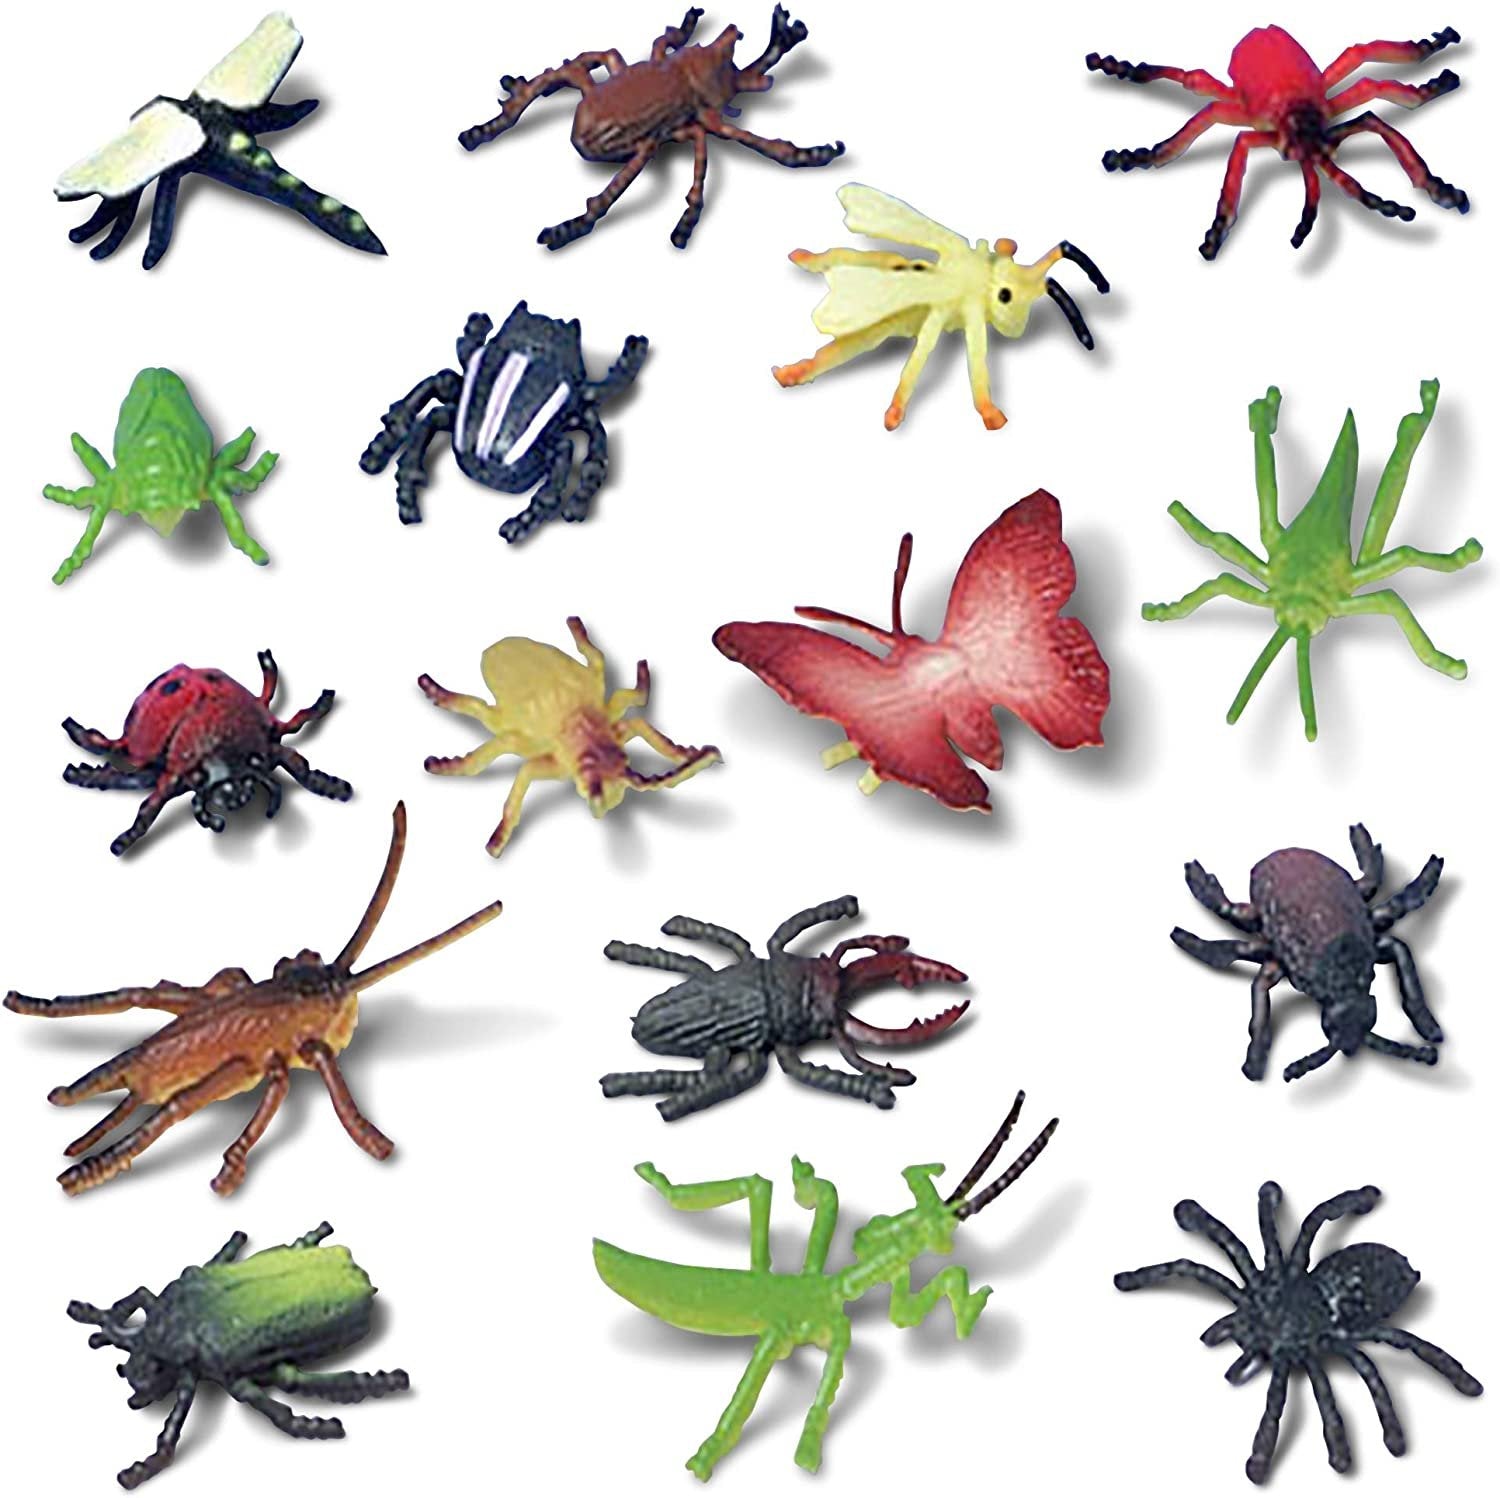 Insect Figurines Toys Set - 72 Pack - Assorted Plastic Bug Animal Figures  for Kids - Fun Learning Aid, Birthday Party Favors, Cake Toppers, Prank Gag